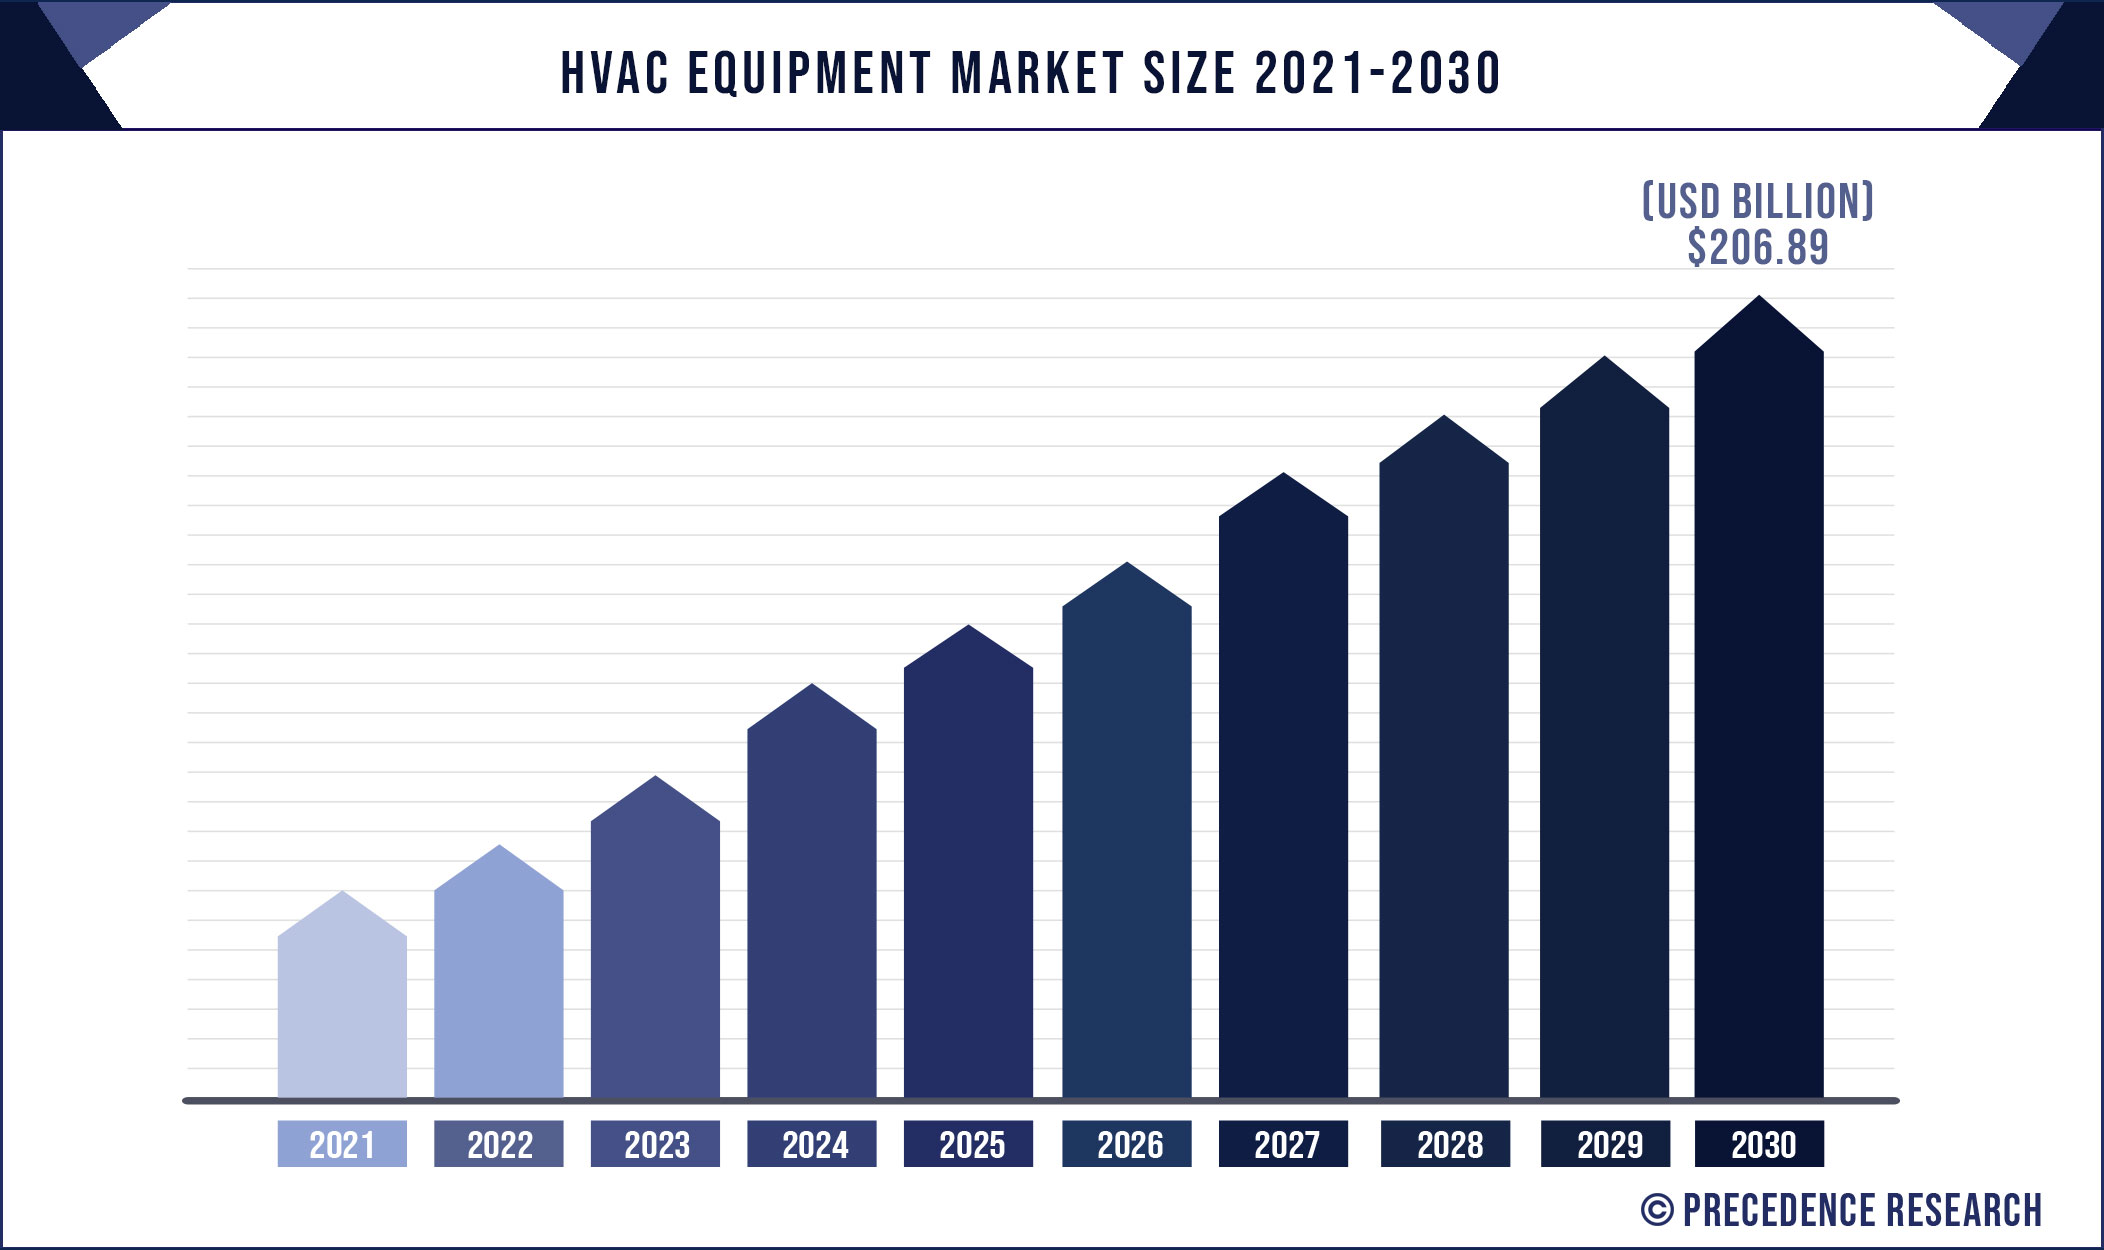 HVAC Equipment Market Size is Expected to Reach $221.60 Billion by 2030